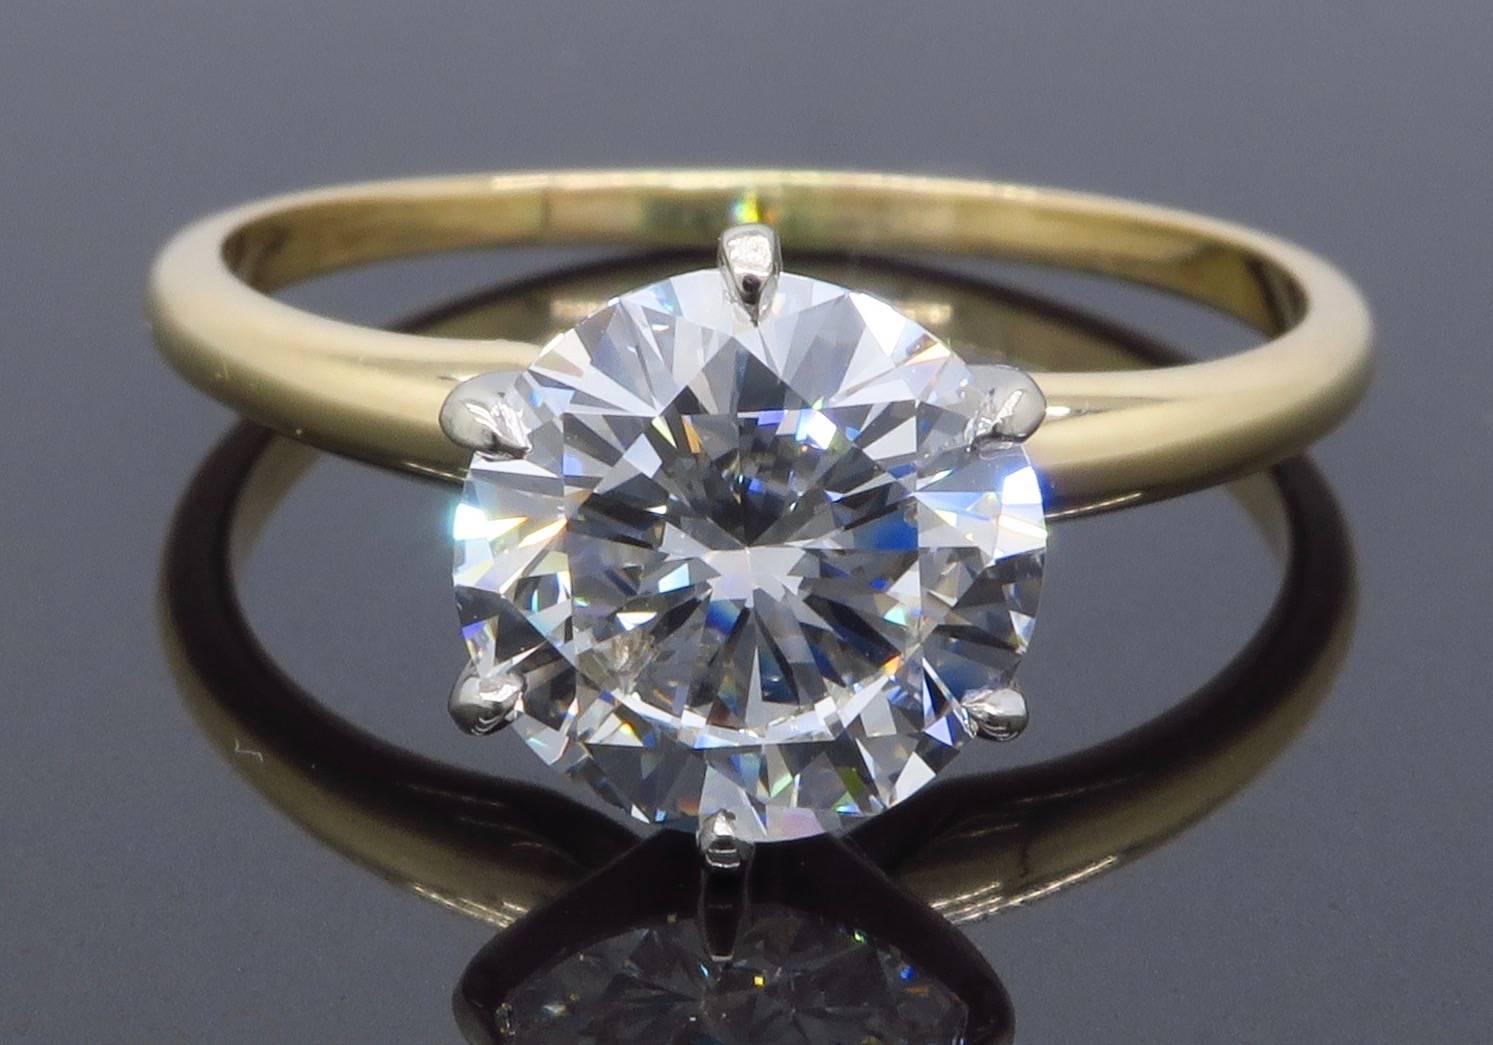 Solitaire diamond engagement ring features a GIA Certified 2.01CT Round Brilliant Cut Diamond with G color and VS2 clarity.  The 14K Yellow Gold ring weighs 3.0 grams, and is currently a size 9. This ring is sizable.   
GIA Certification # 5066072